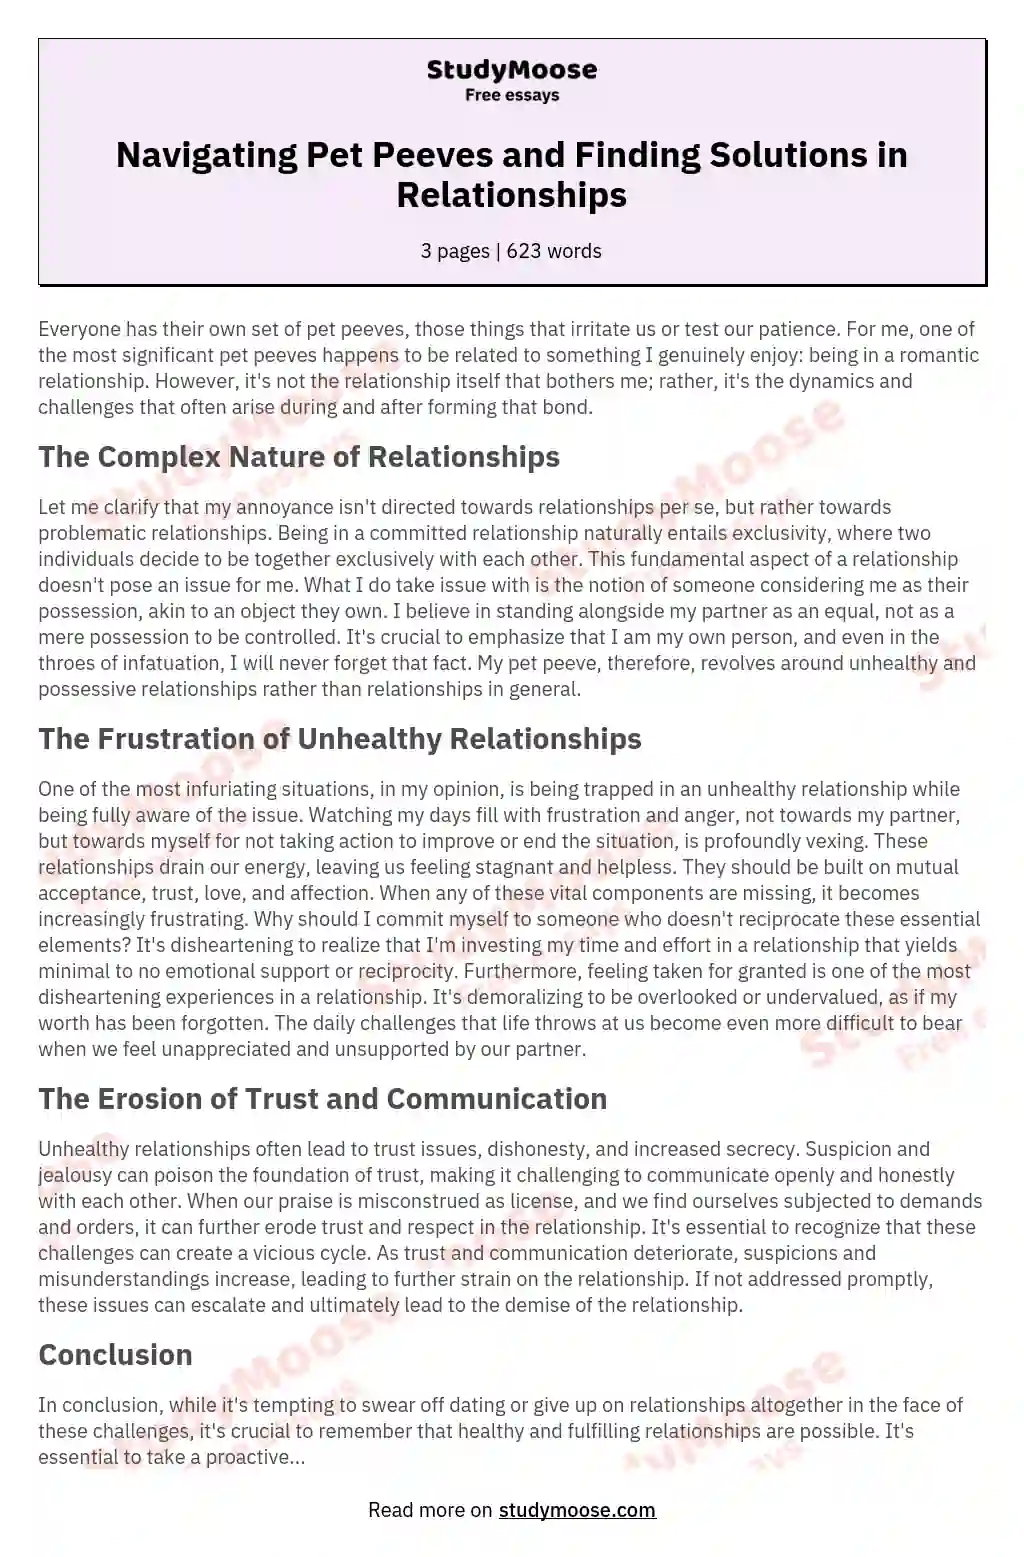 Navigating Pet Peeves and Finding Solutions in Relationships essay